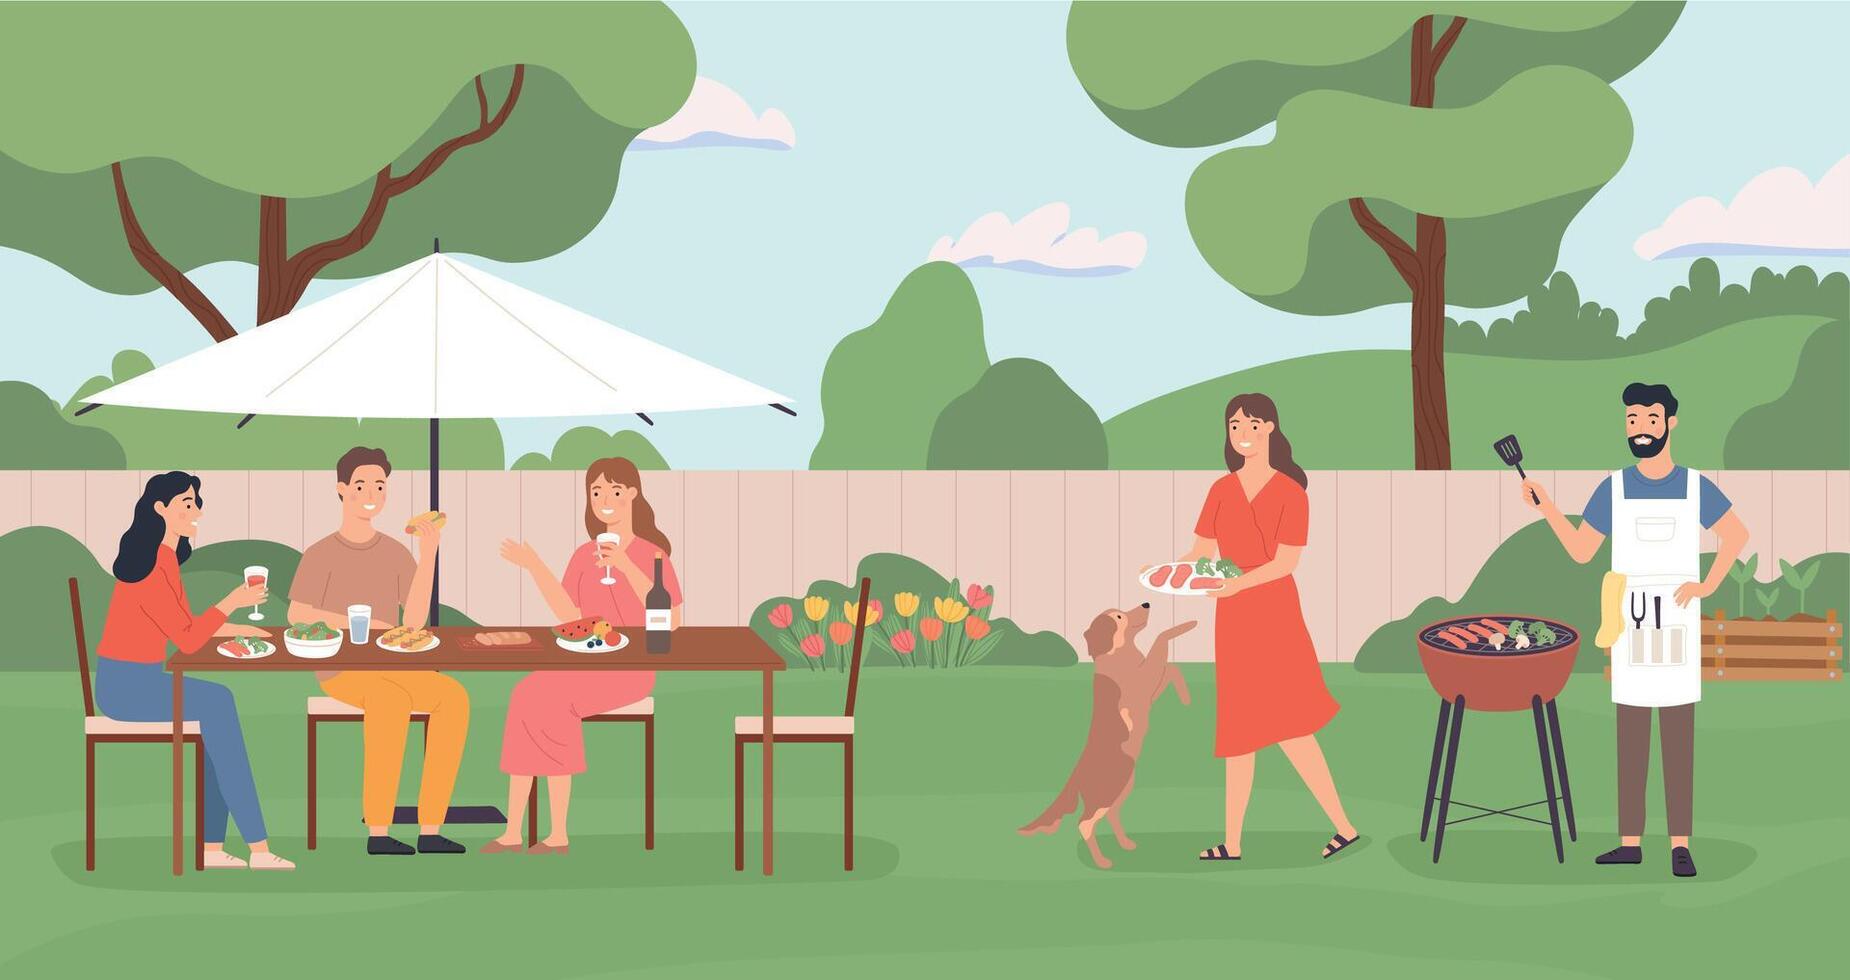 Friends enjoying party with barbecue on backyard vector